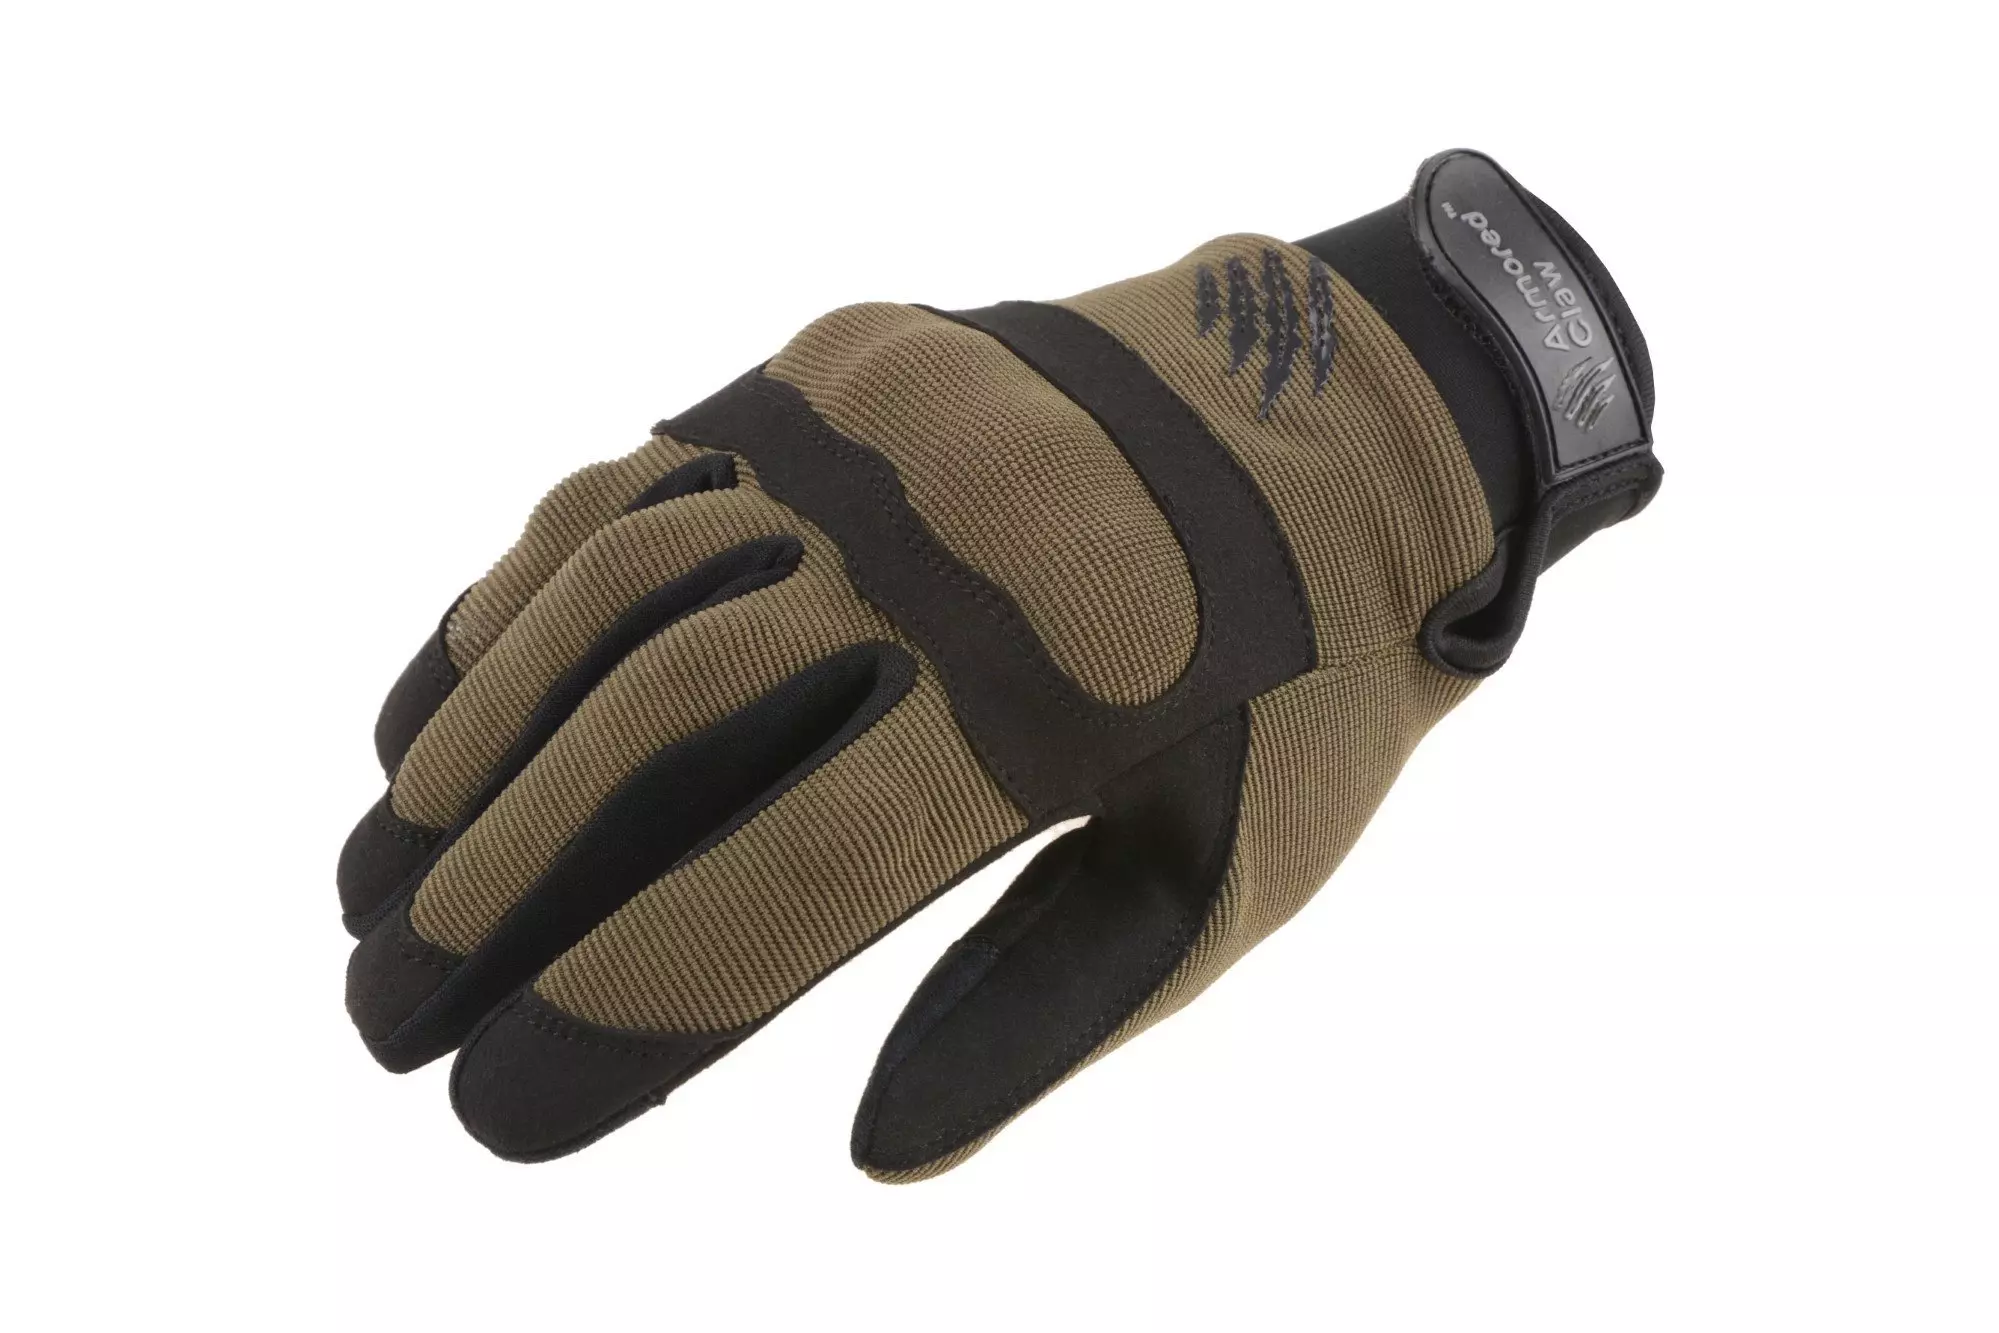 Armored Claw Shield Flex™ Tactical Gloves - Olive Drab